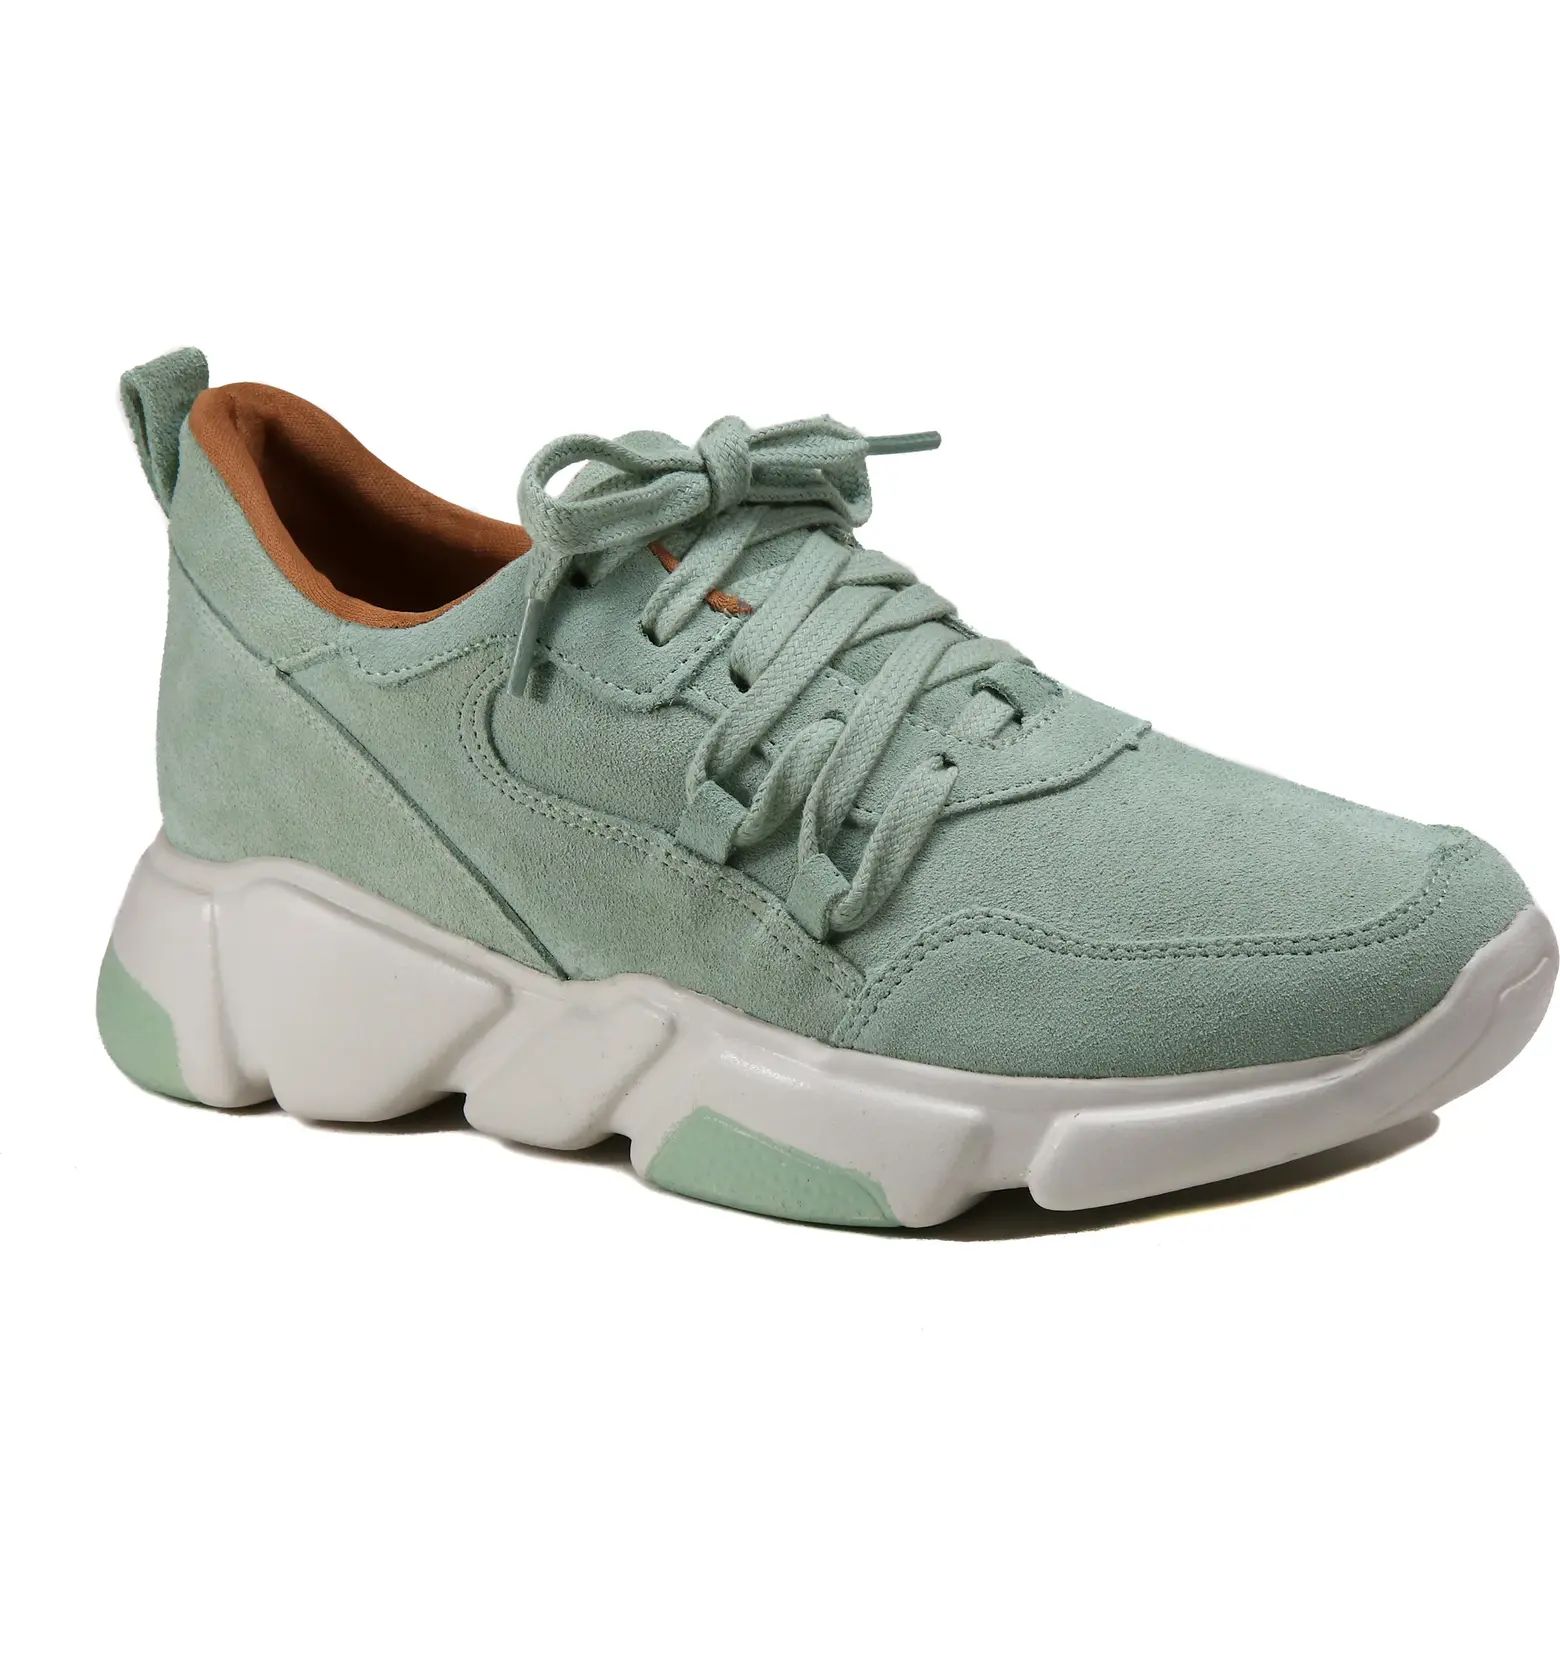 B.O.G. Collective Band of Gypsies Sneaker | Nordstrom | Nordstrom